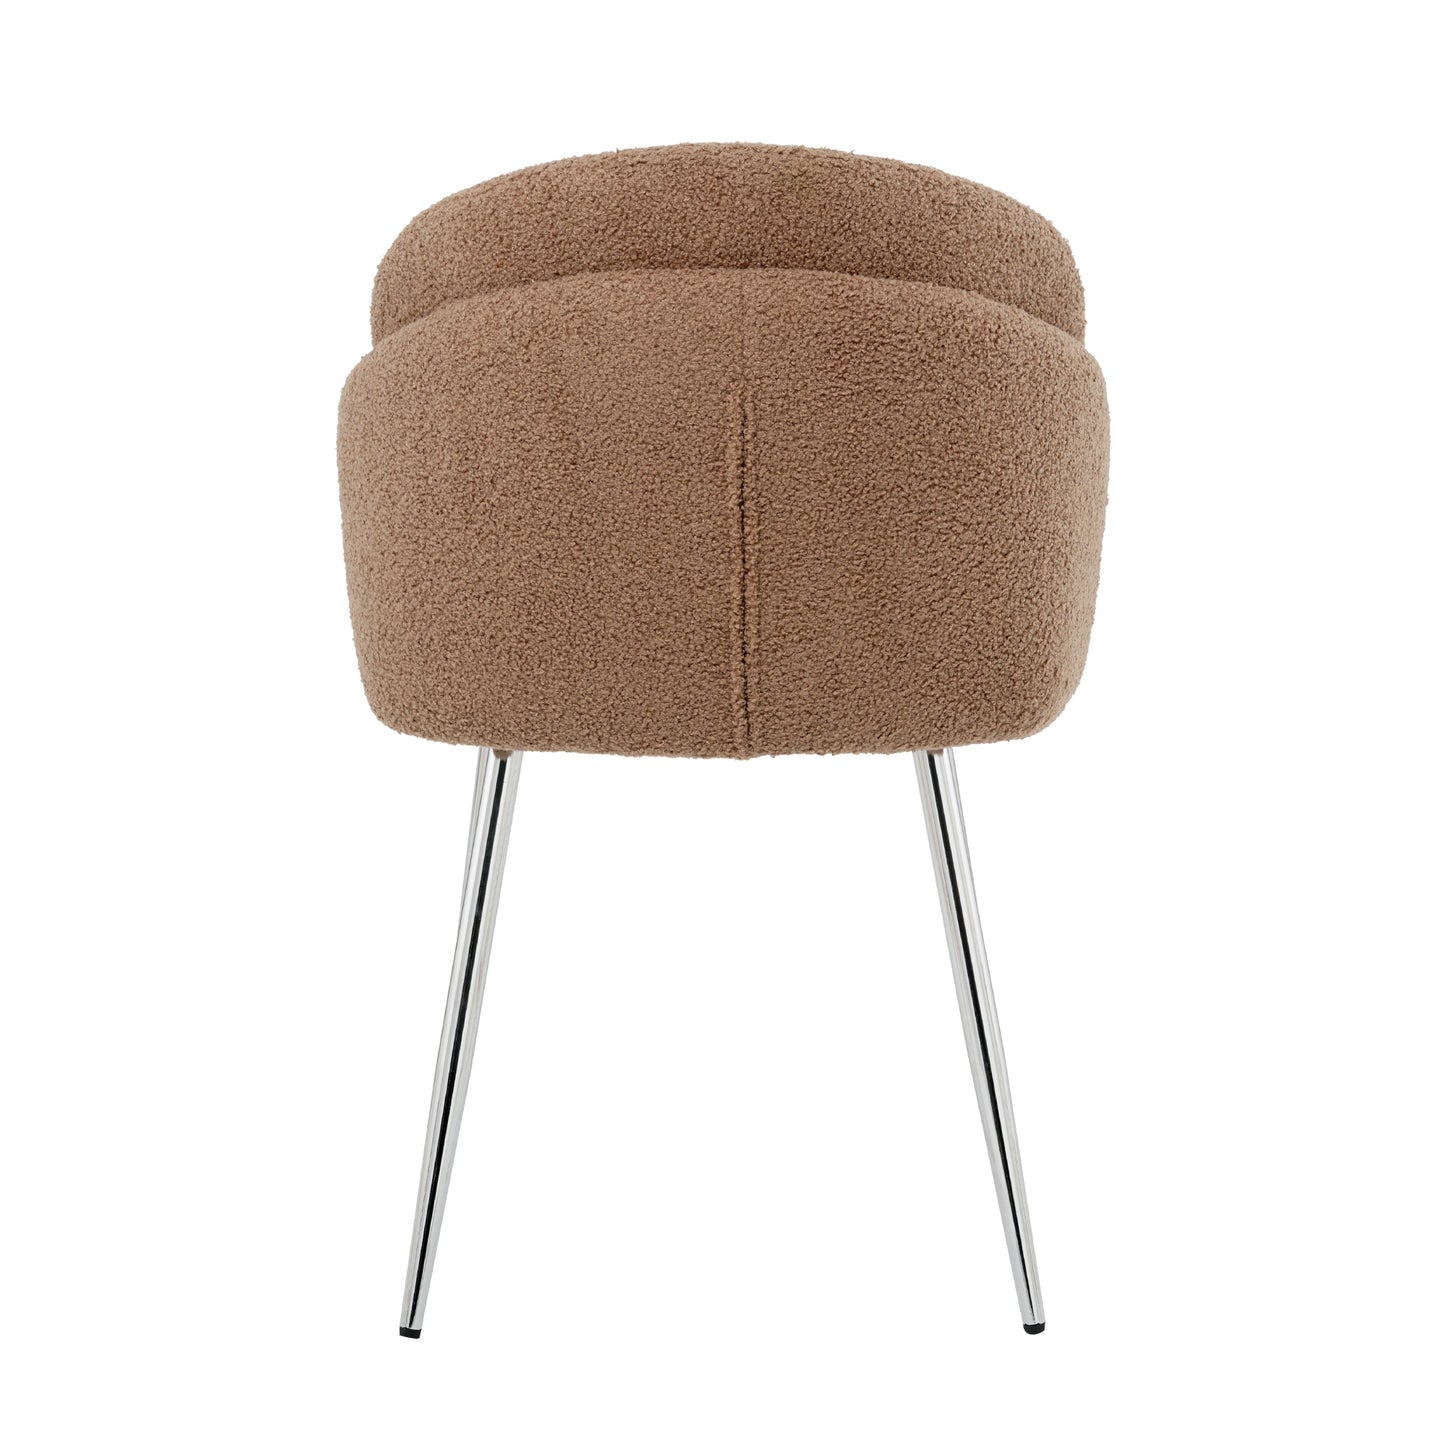 Modern simple brown teddy fleece dining chair Fabric Upholstered Chairs home bedroom stool back dressing chair chrome metal legs(set of 2) - Enova Luxe Home Store